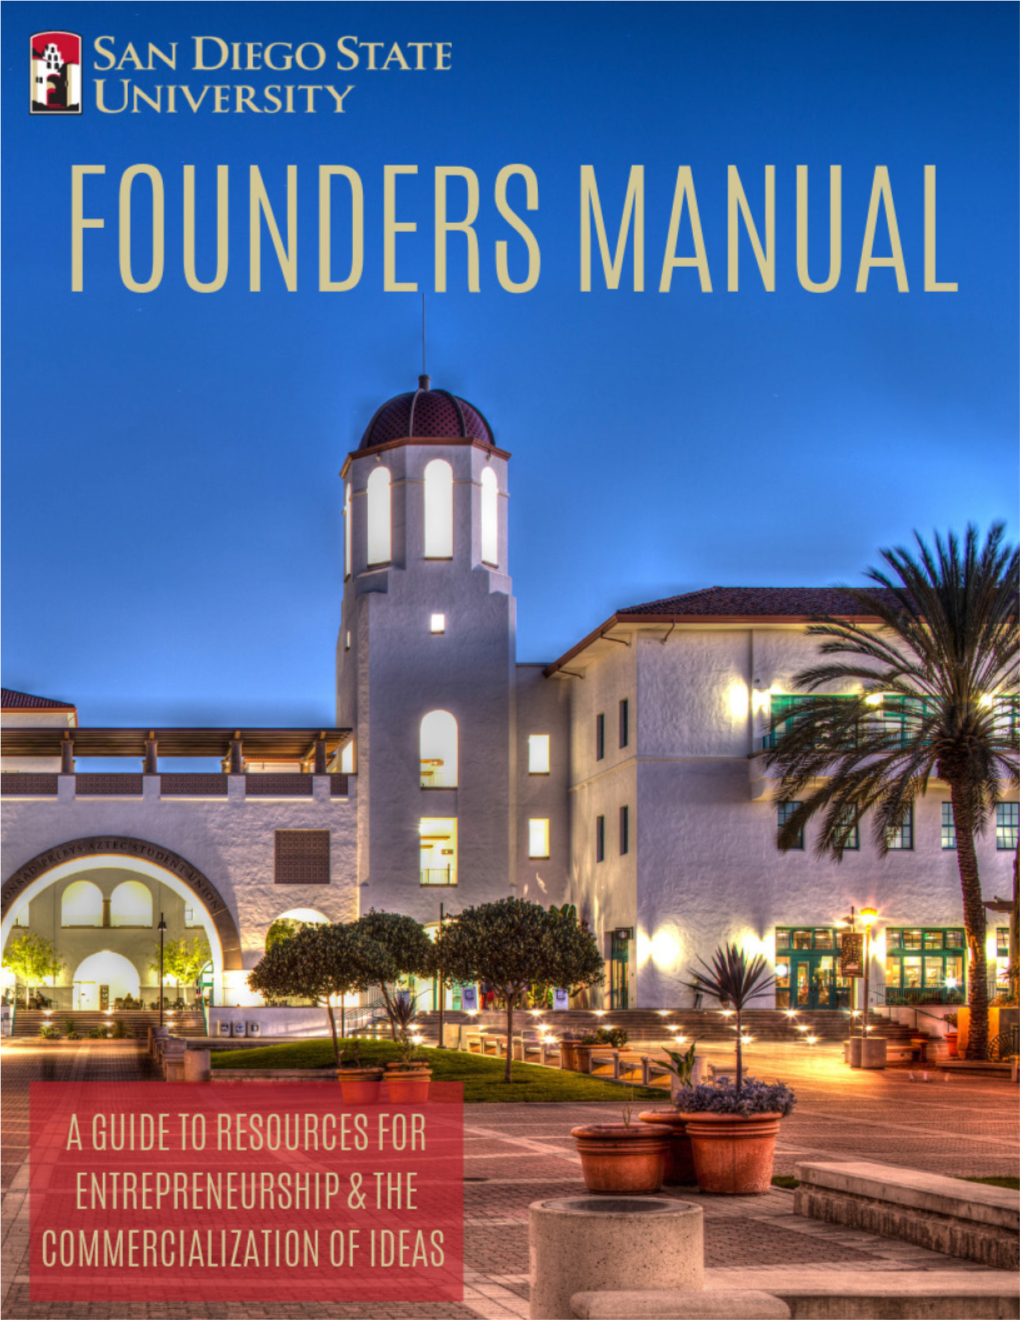 Download the SDSU Founders Manual